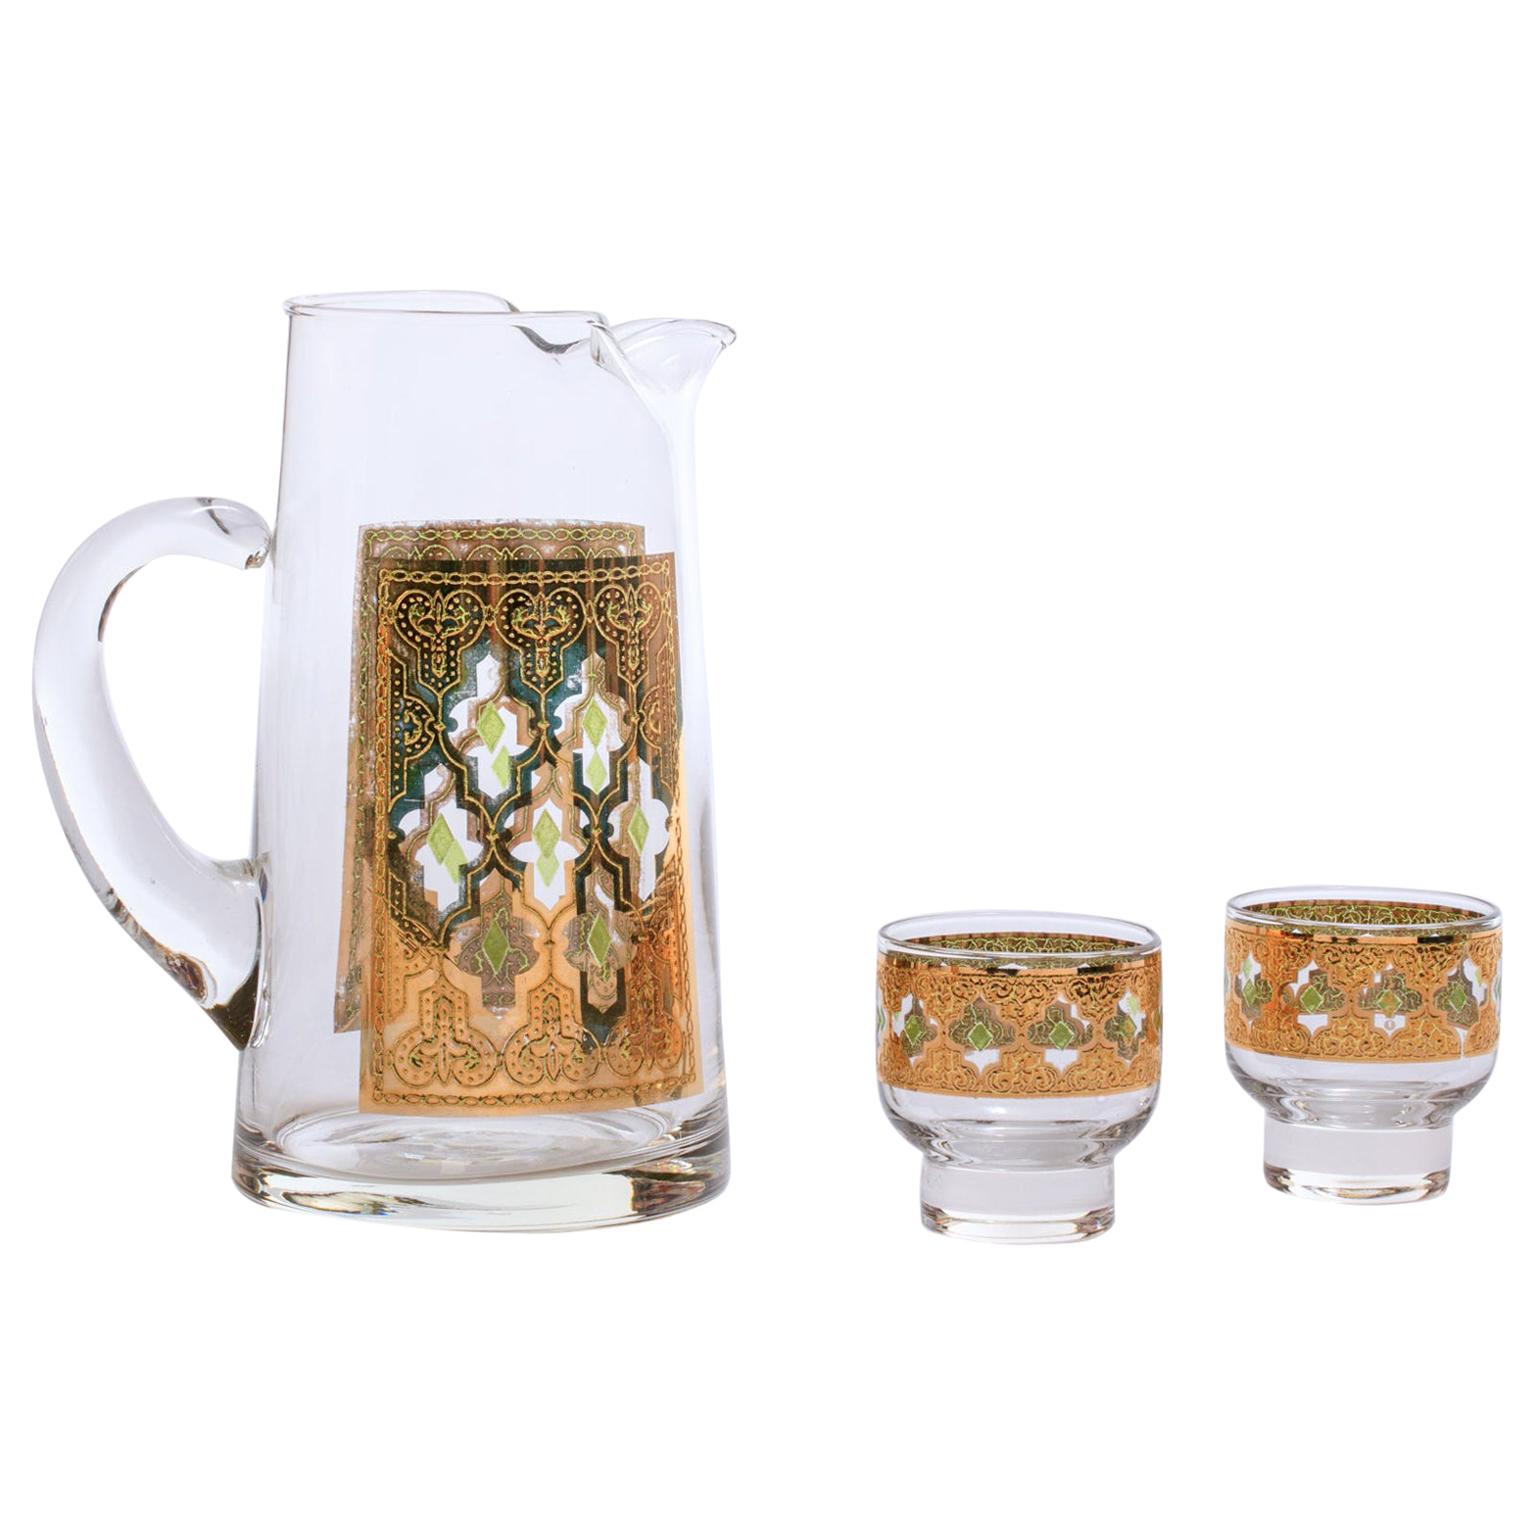 22-Karat Gold Moroccan Themed Vintage Beverage or Water Pitcher with Glasses